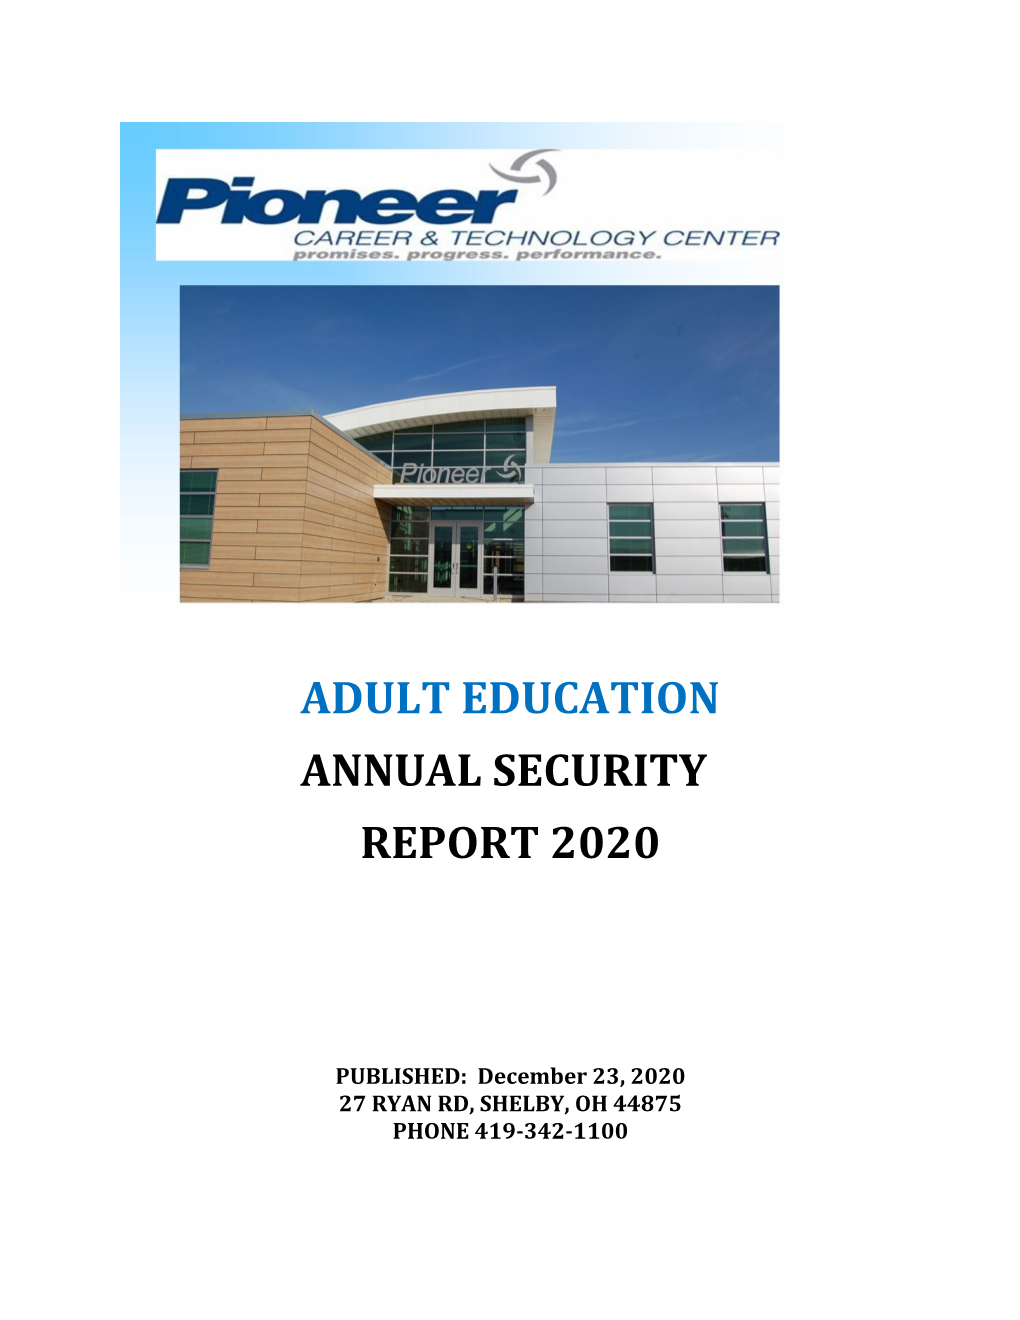 Adult Education Annual Security Report 2020